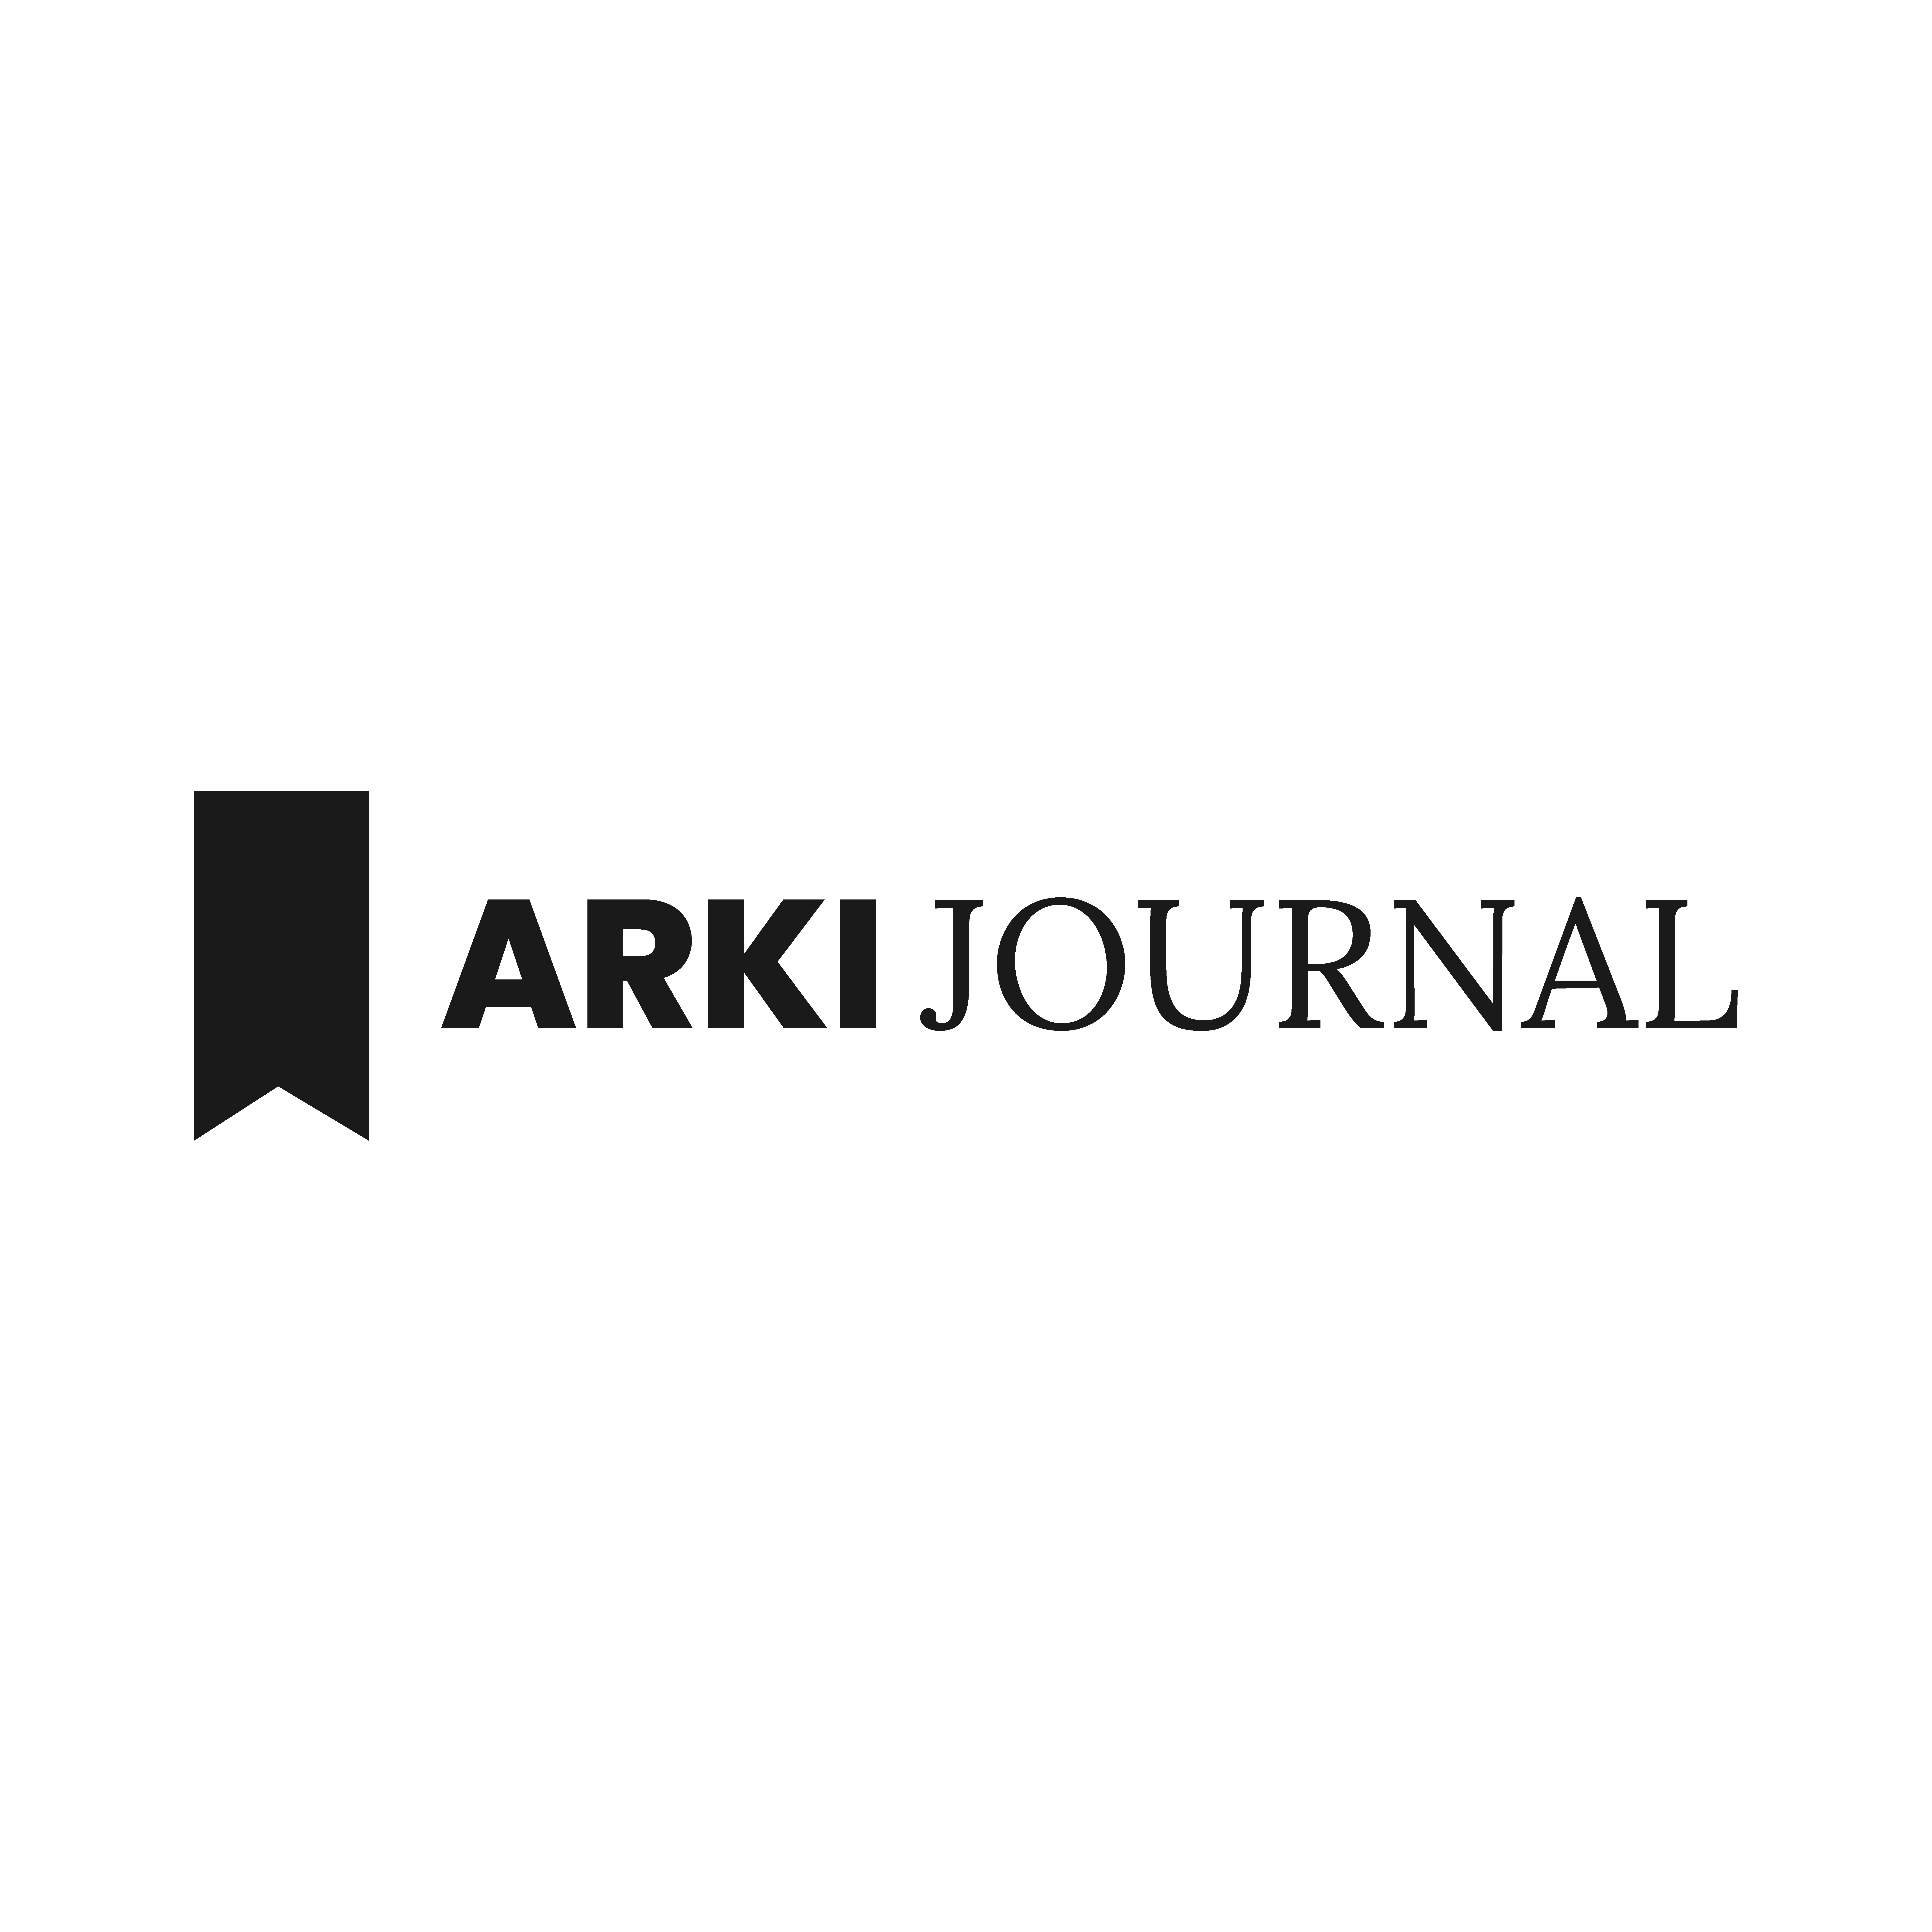 United States agency Horizon Digital Creatives helped Arkijournal grow their business with SEO and digital marketing